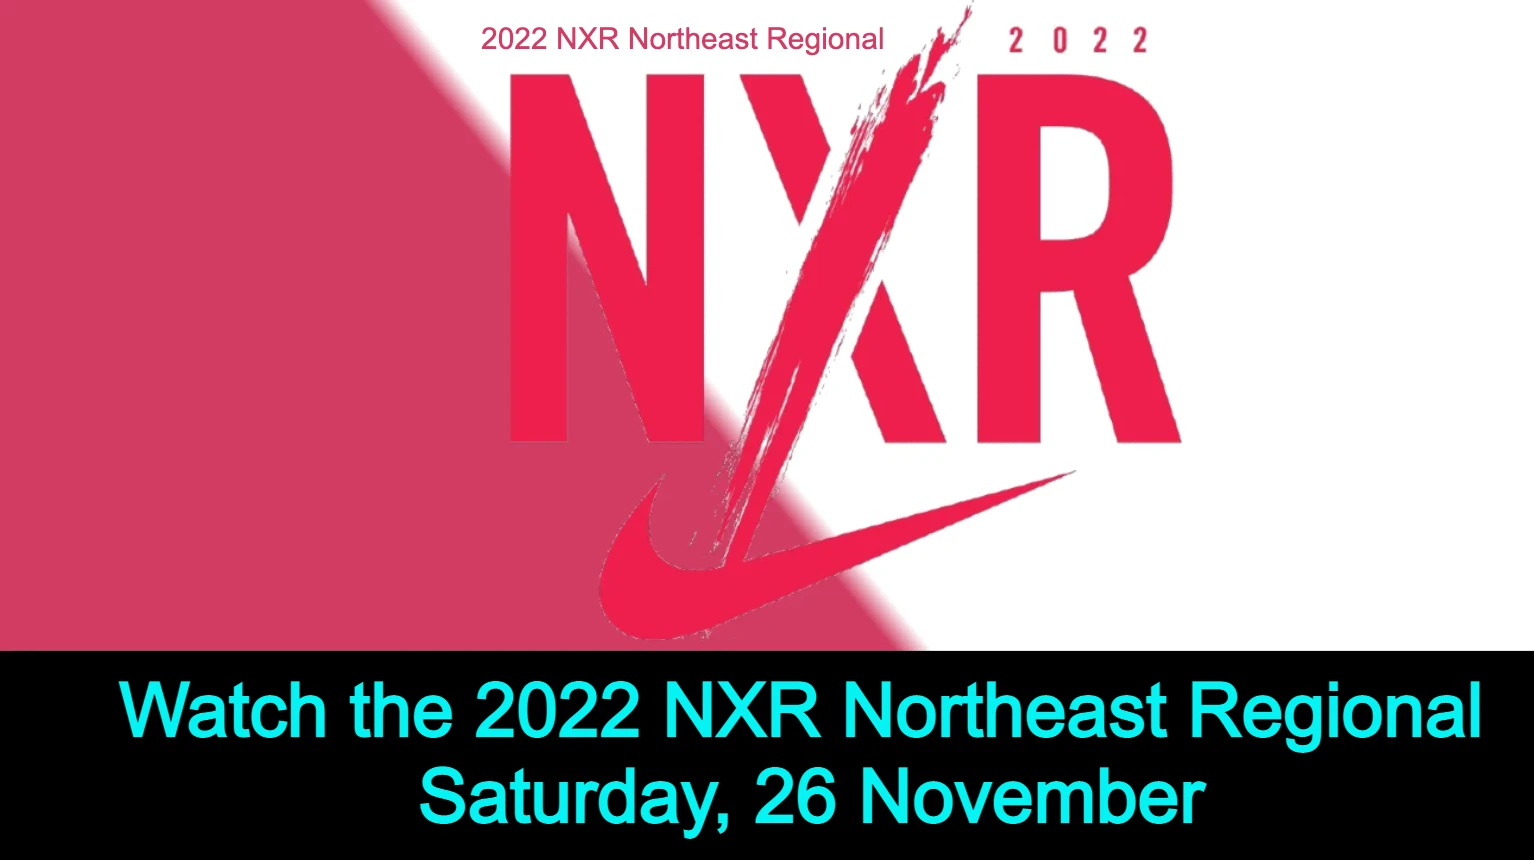 How to watch the 2022 NXR Northeast Regional?